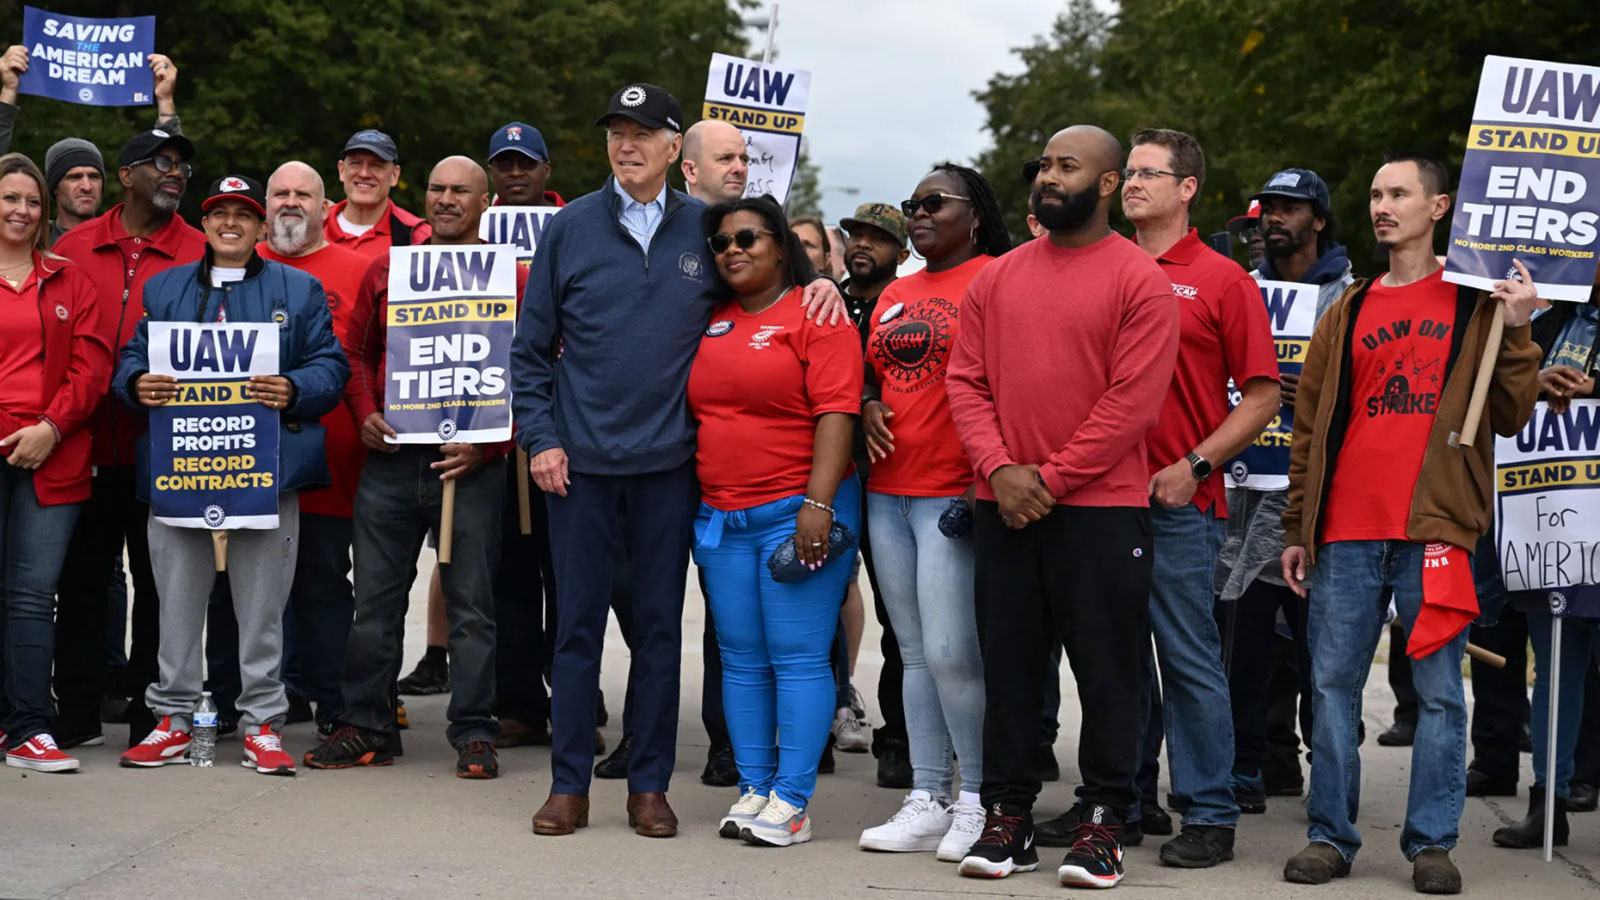 Biden joins UAW strikers at picket line, showing solidarity in historic moment